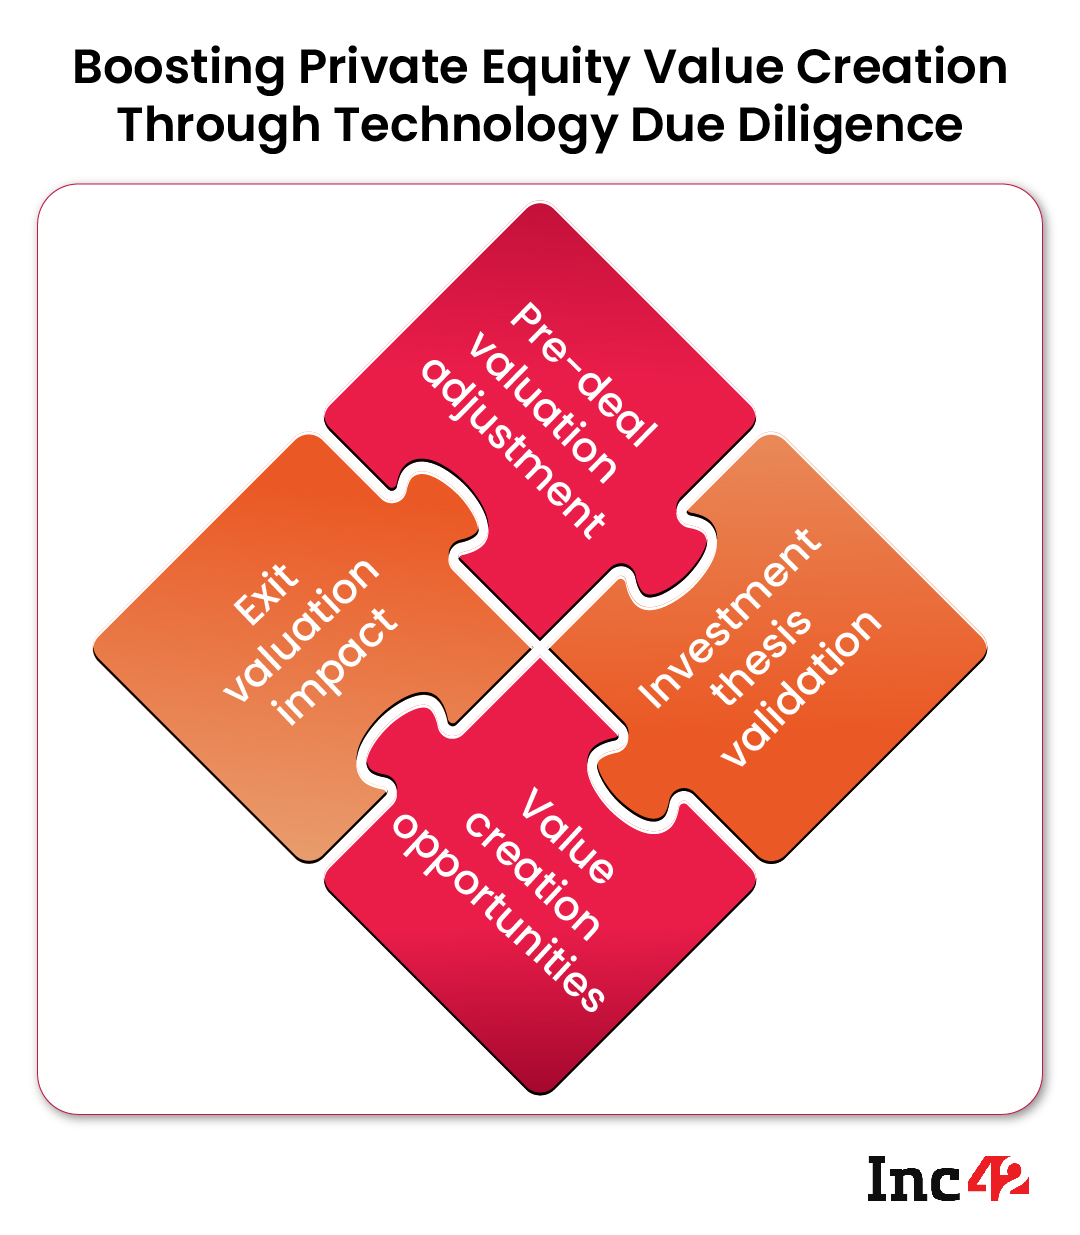 Boosting Private Equity Value Creation Through Technology Due Diligence